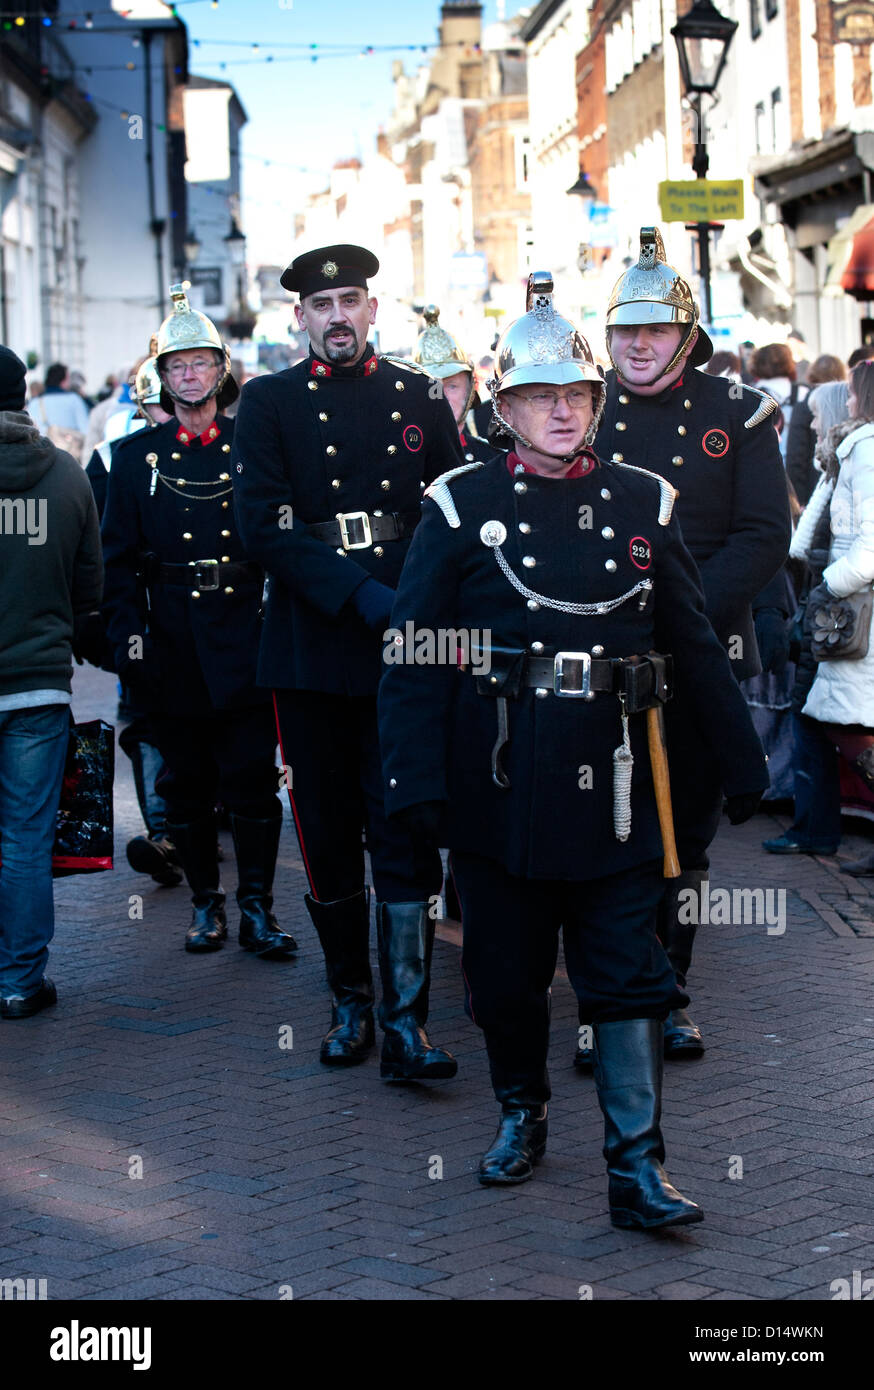 Members of the Fire Preservation Group parading during the Dickens Christmas Festival. Stock Photo